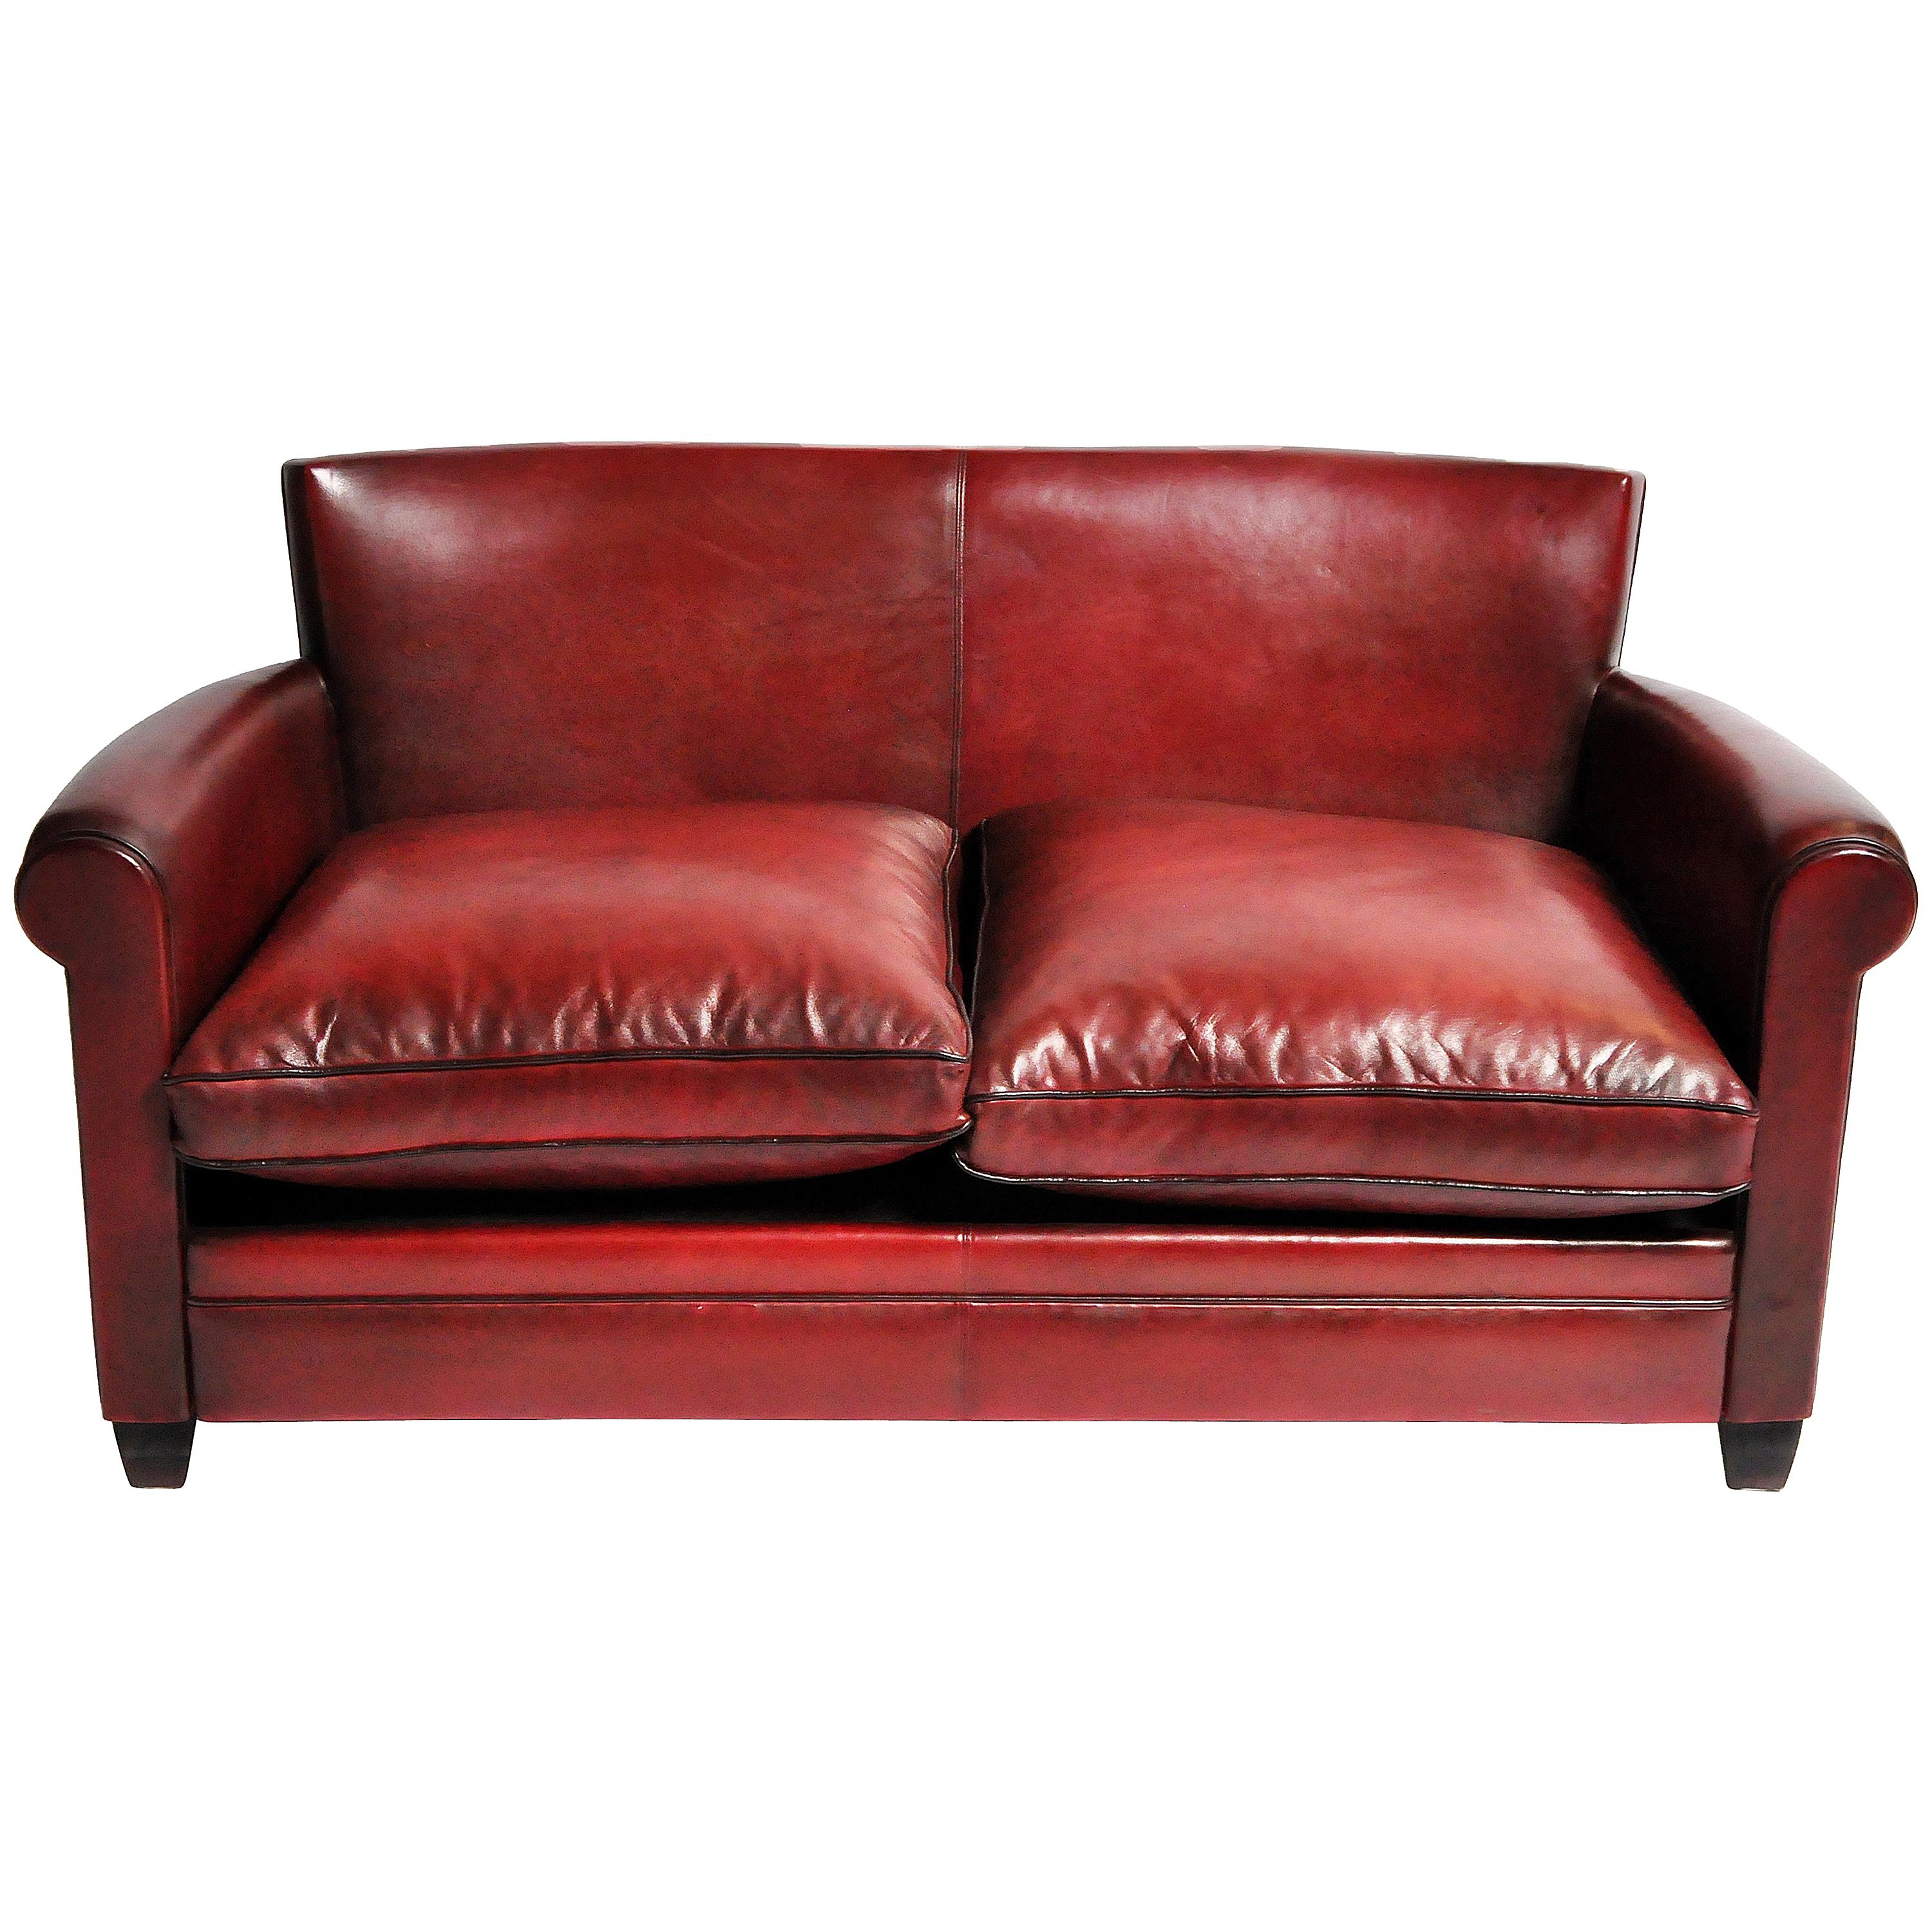 Grand Parisian Style Red Leather Sofa